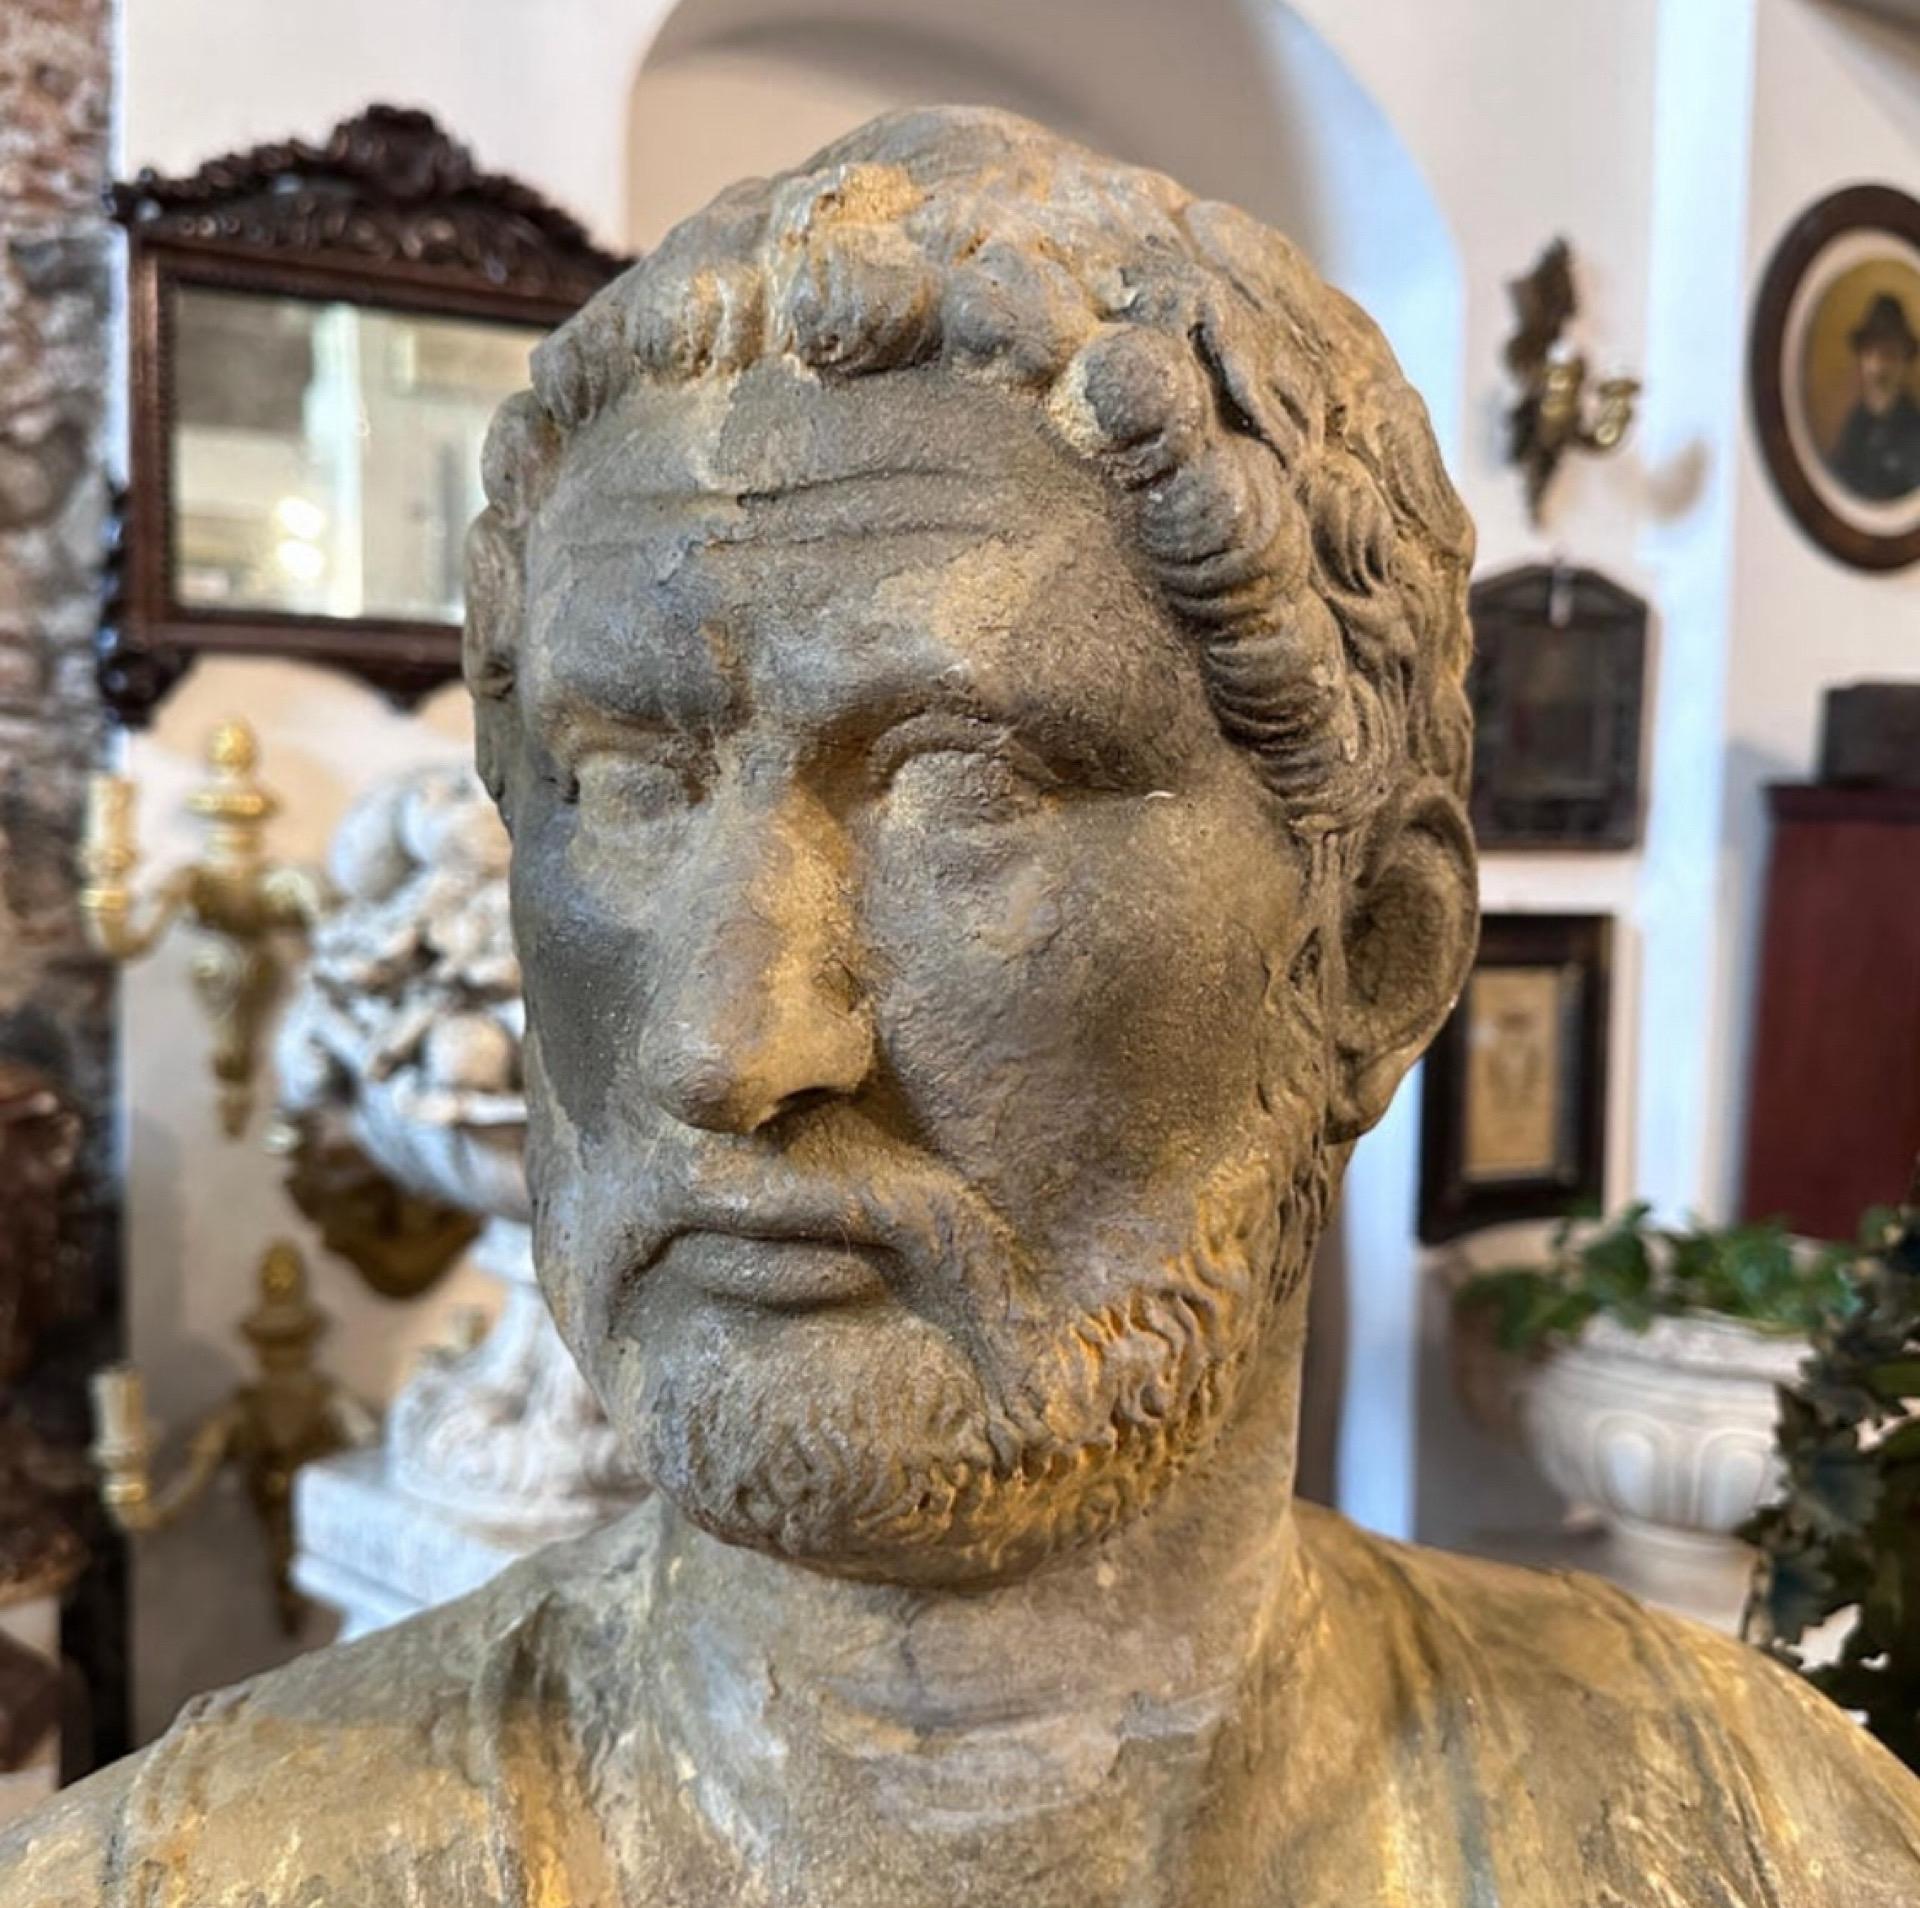 An original patina terracotta bust hand-crafted in Siclly in the first half of 20th century, it has signs of use and age. The bust of the Roman Emperor Adriano is a captivating and finely crafted sculpture that reflects the artistic influences of